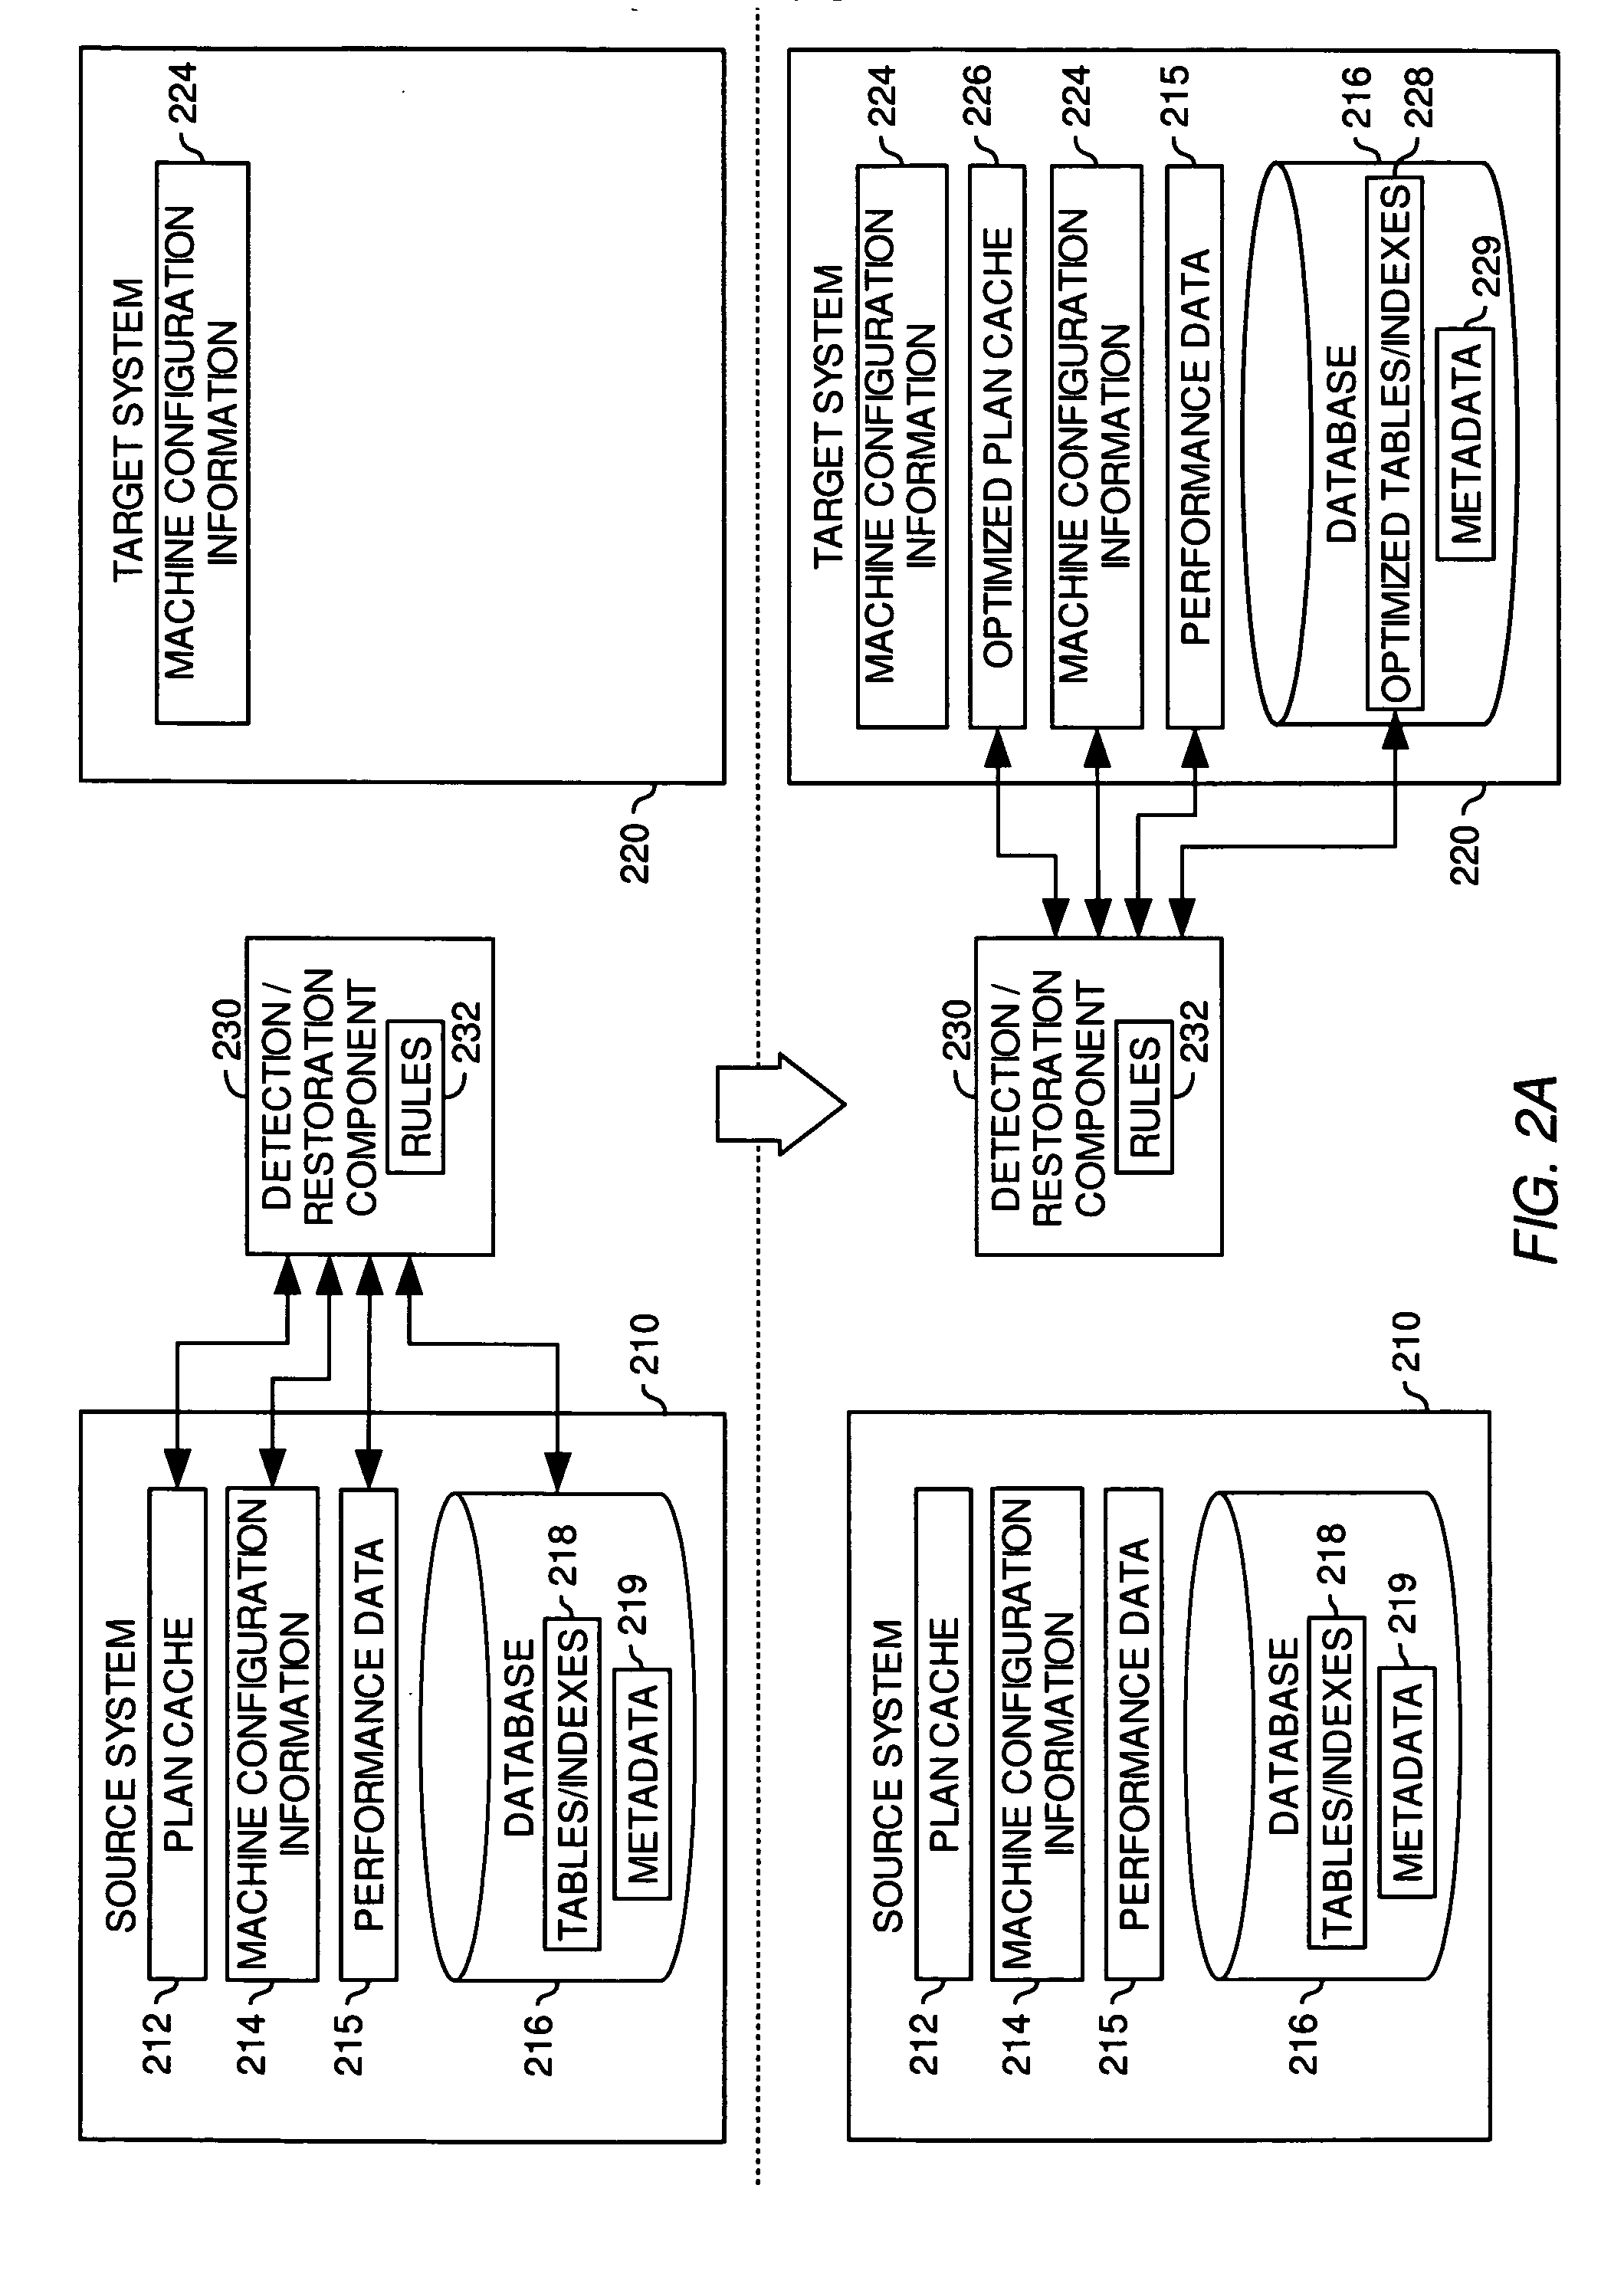 System and method for migrating databases